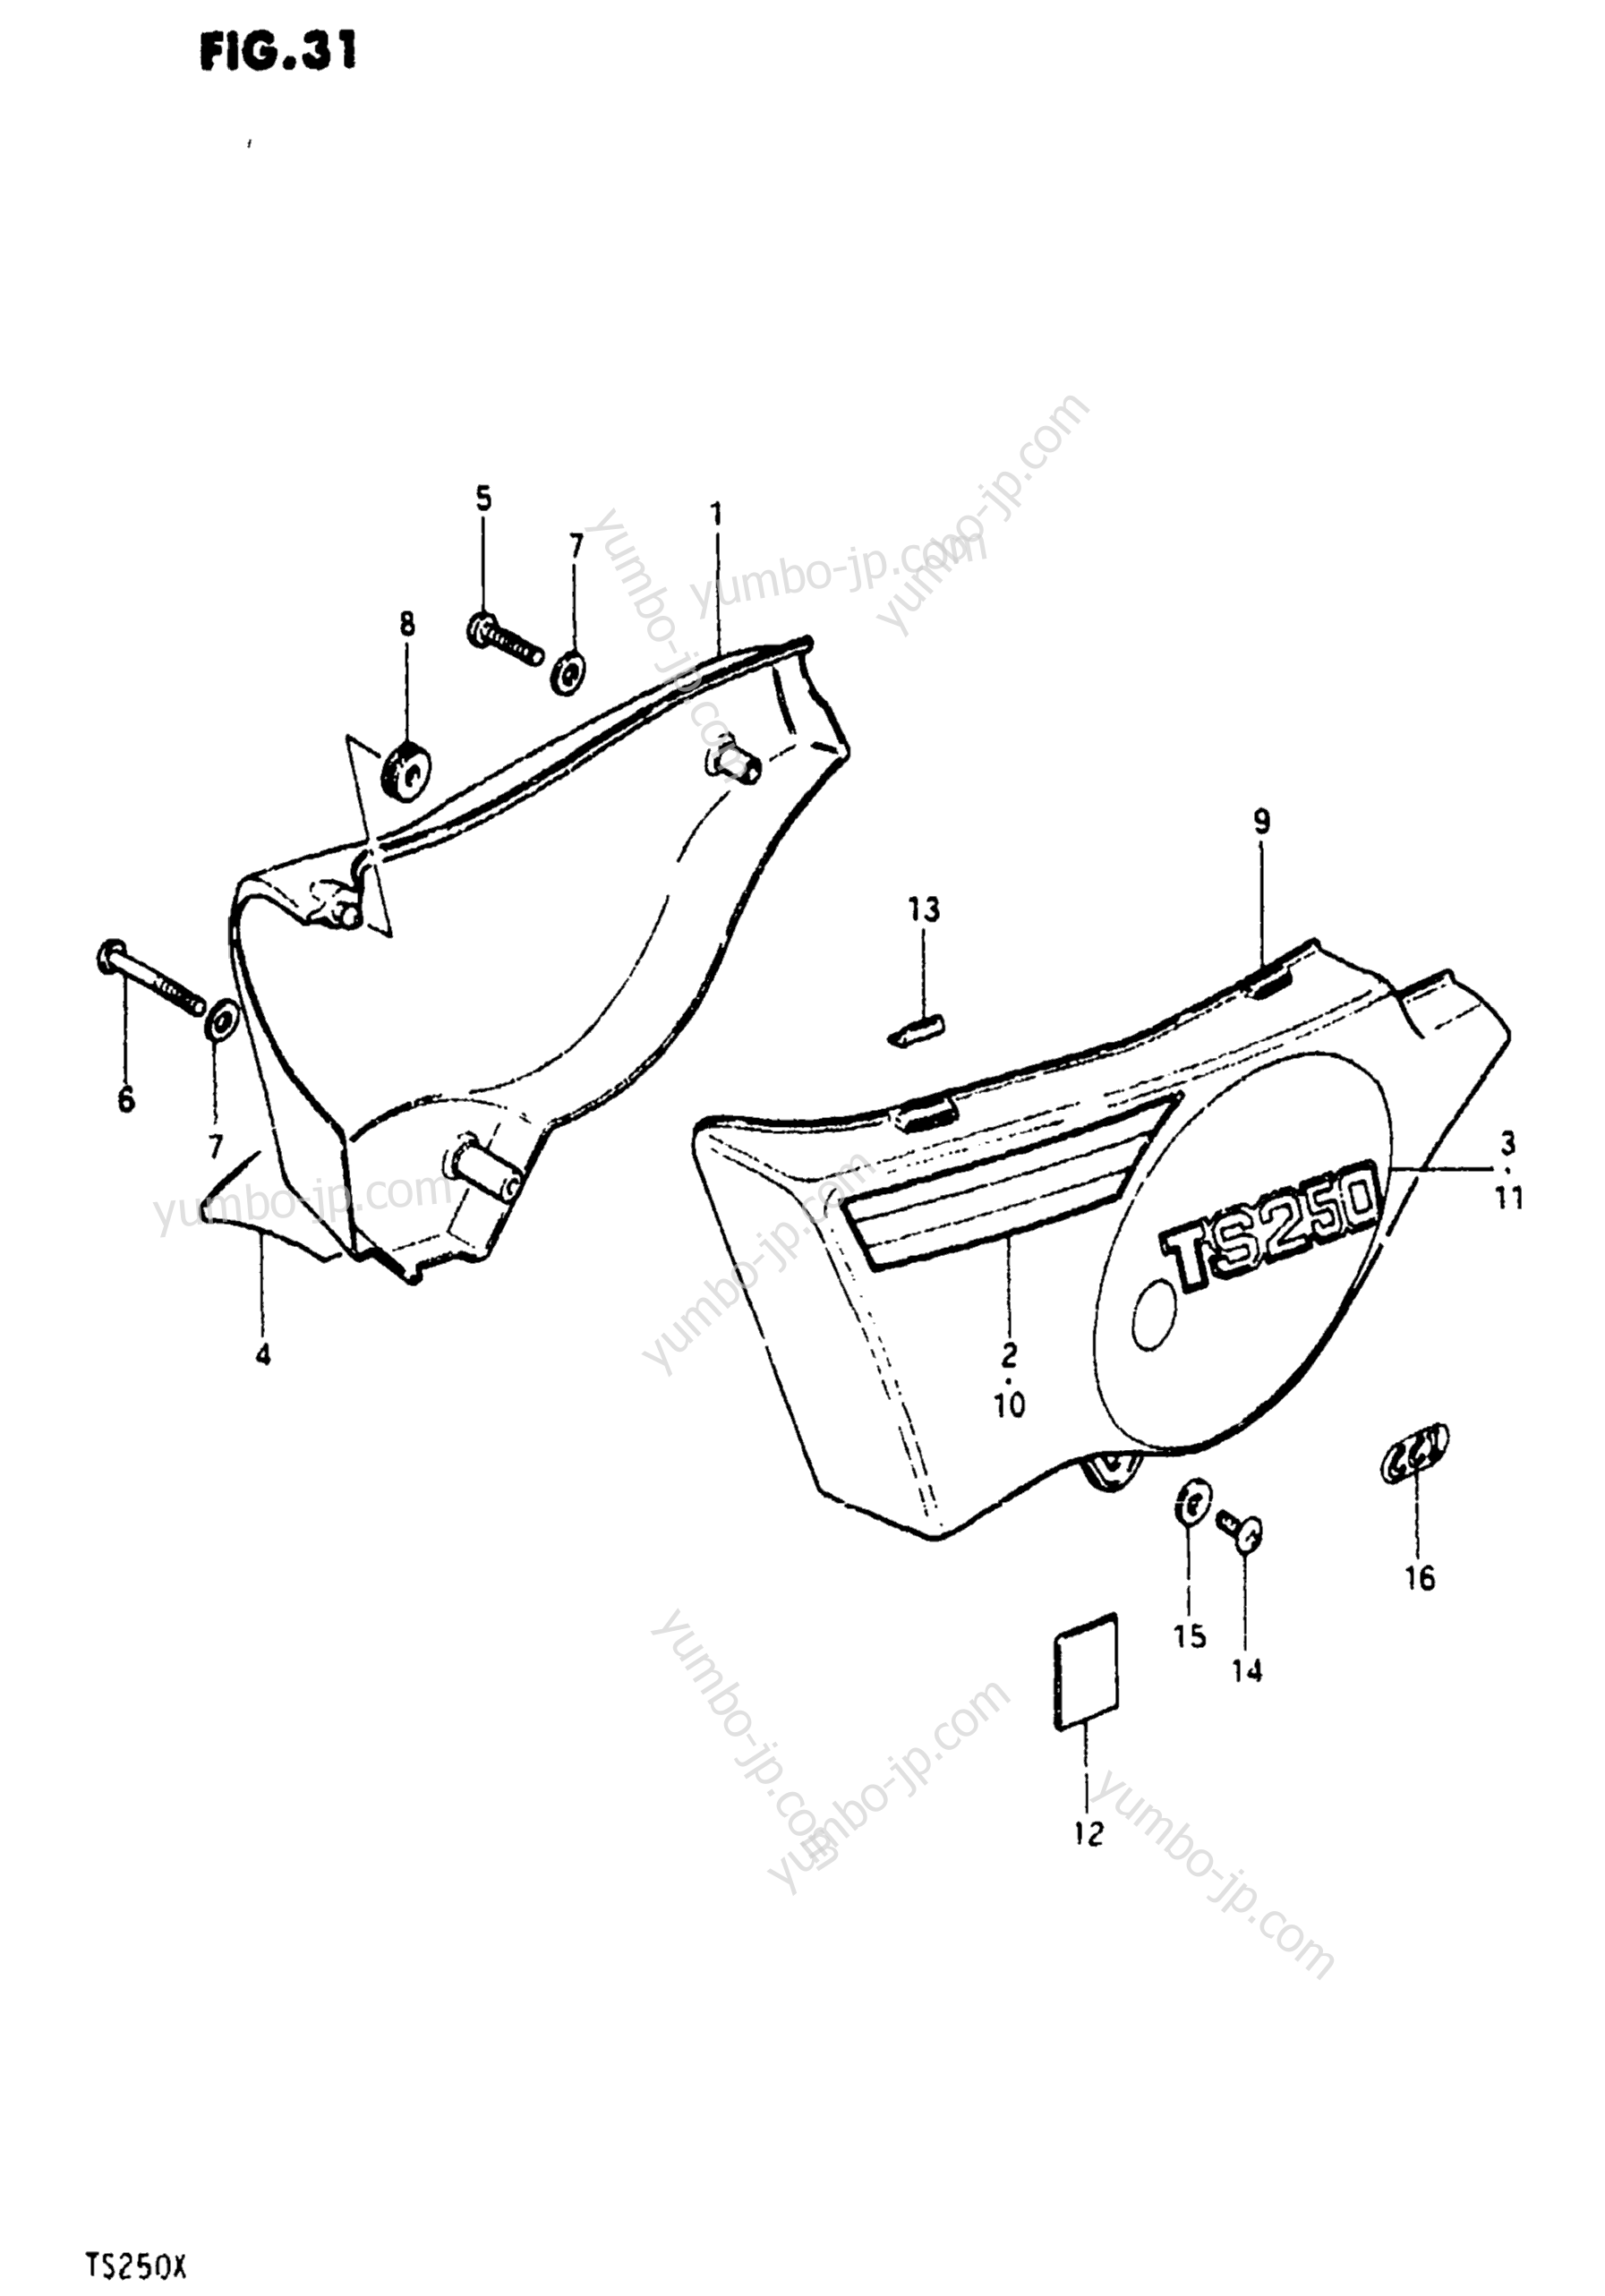 FRAME COVER (TS250X) for motorcycles SUZUKI TS250 1980 year